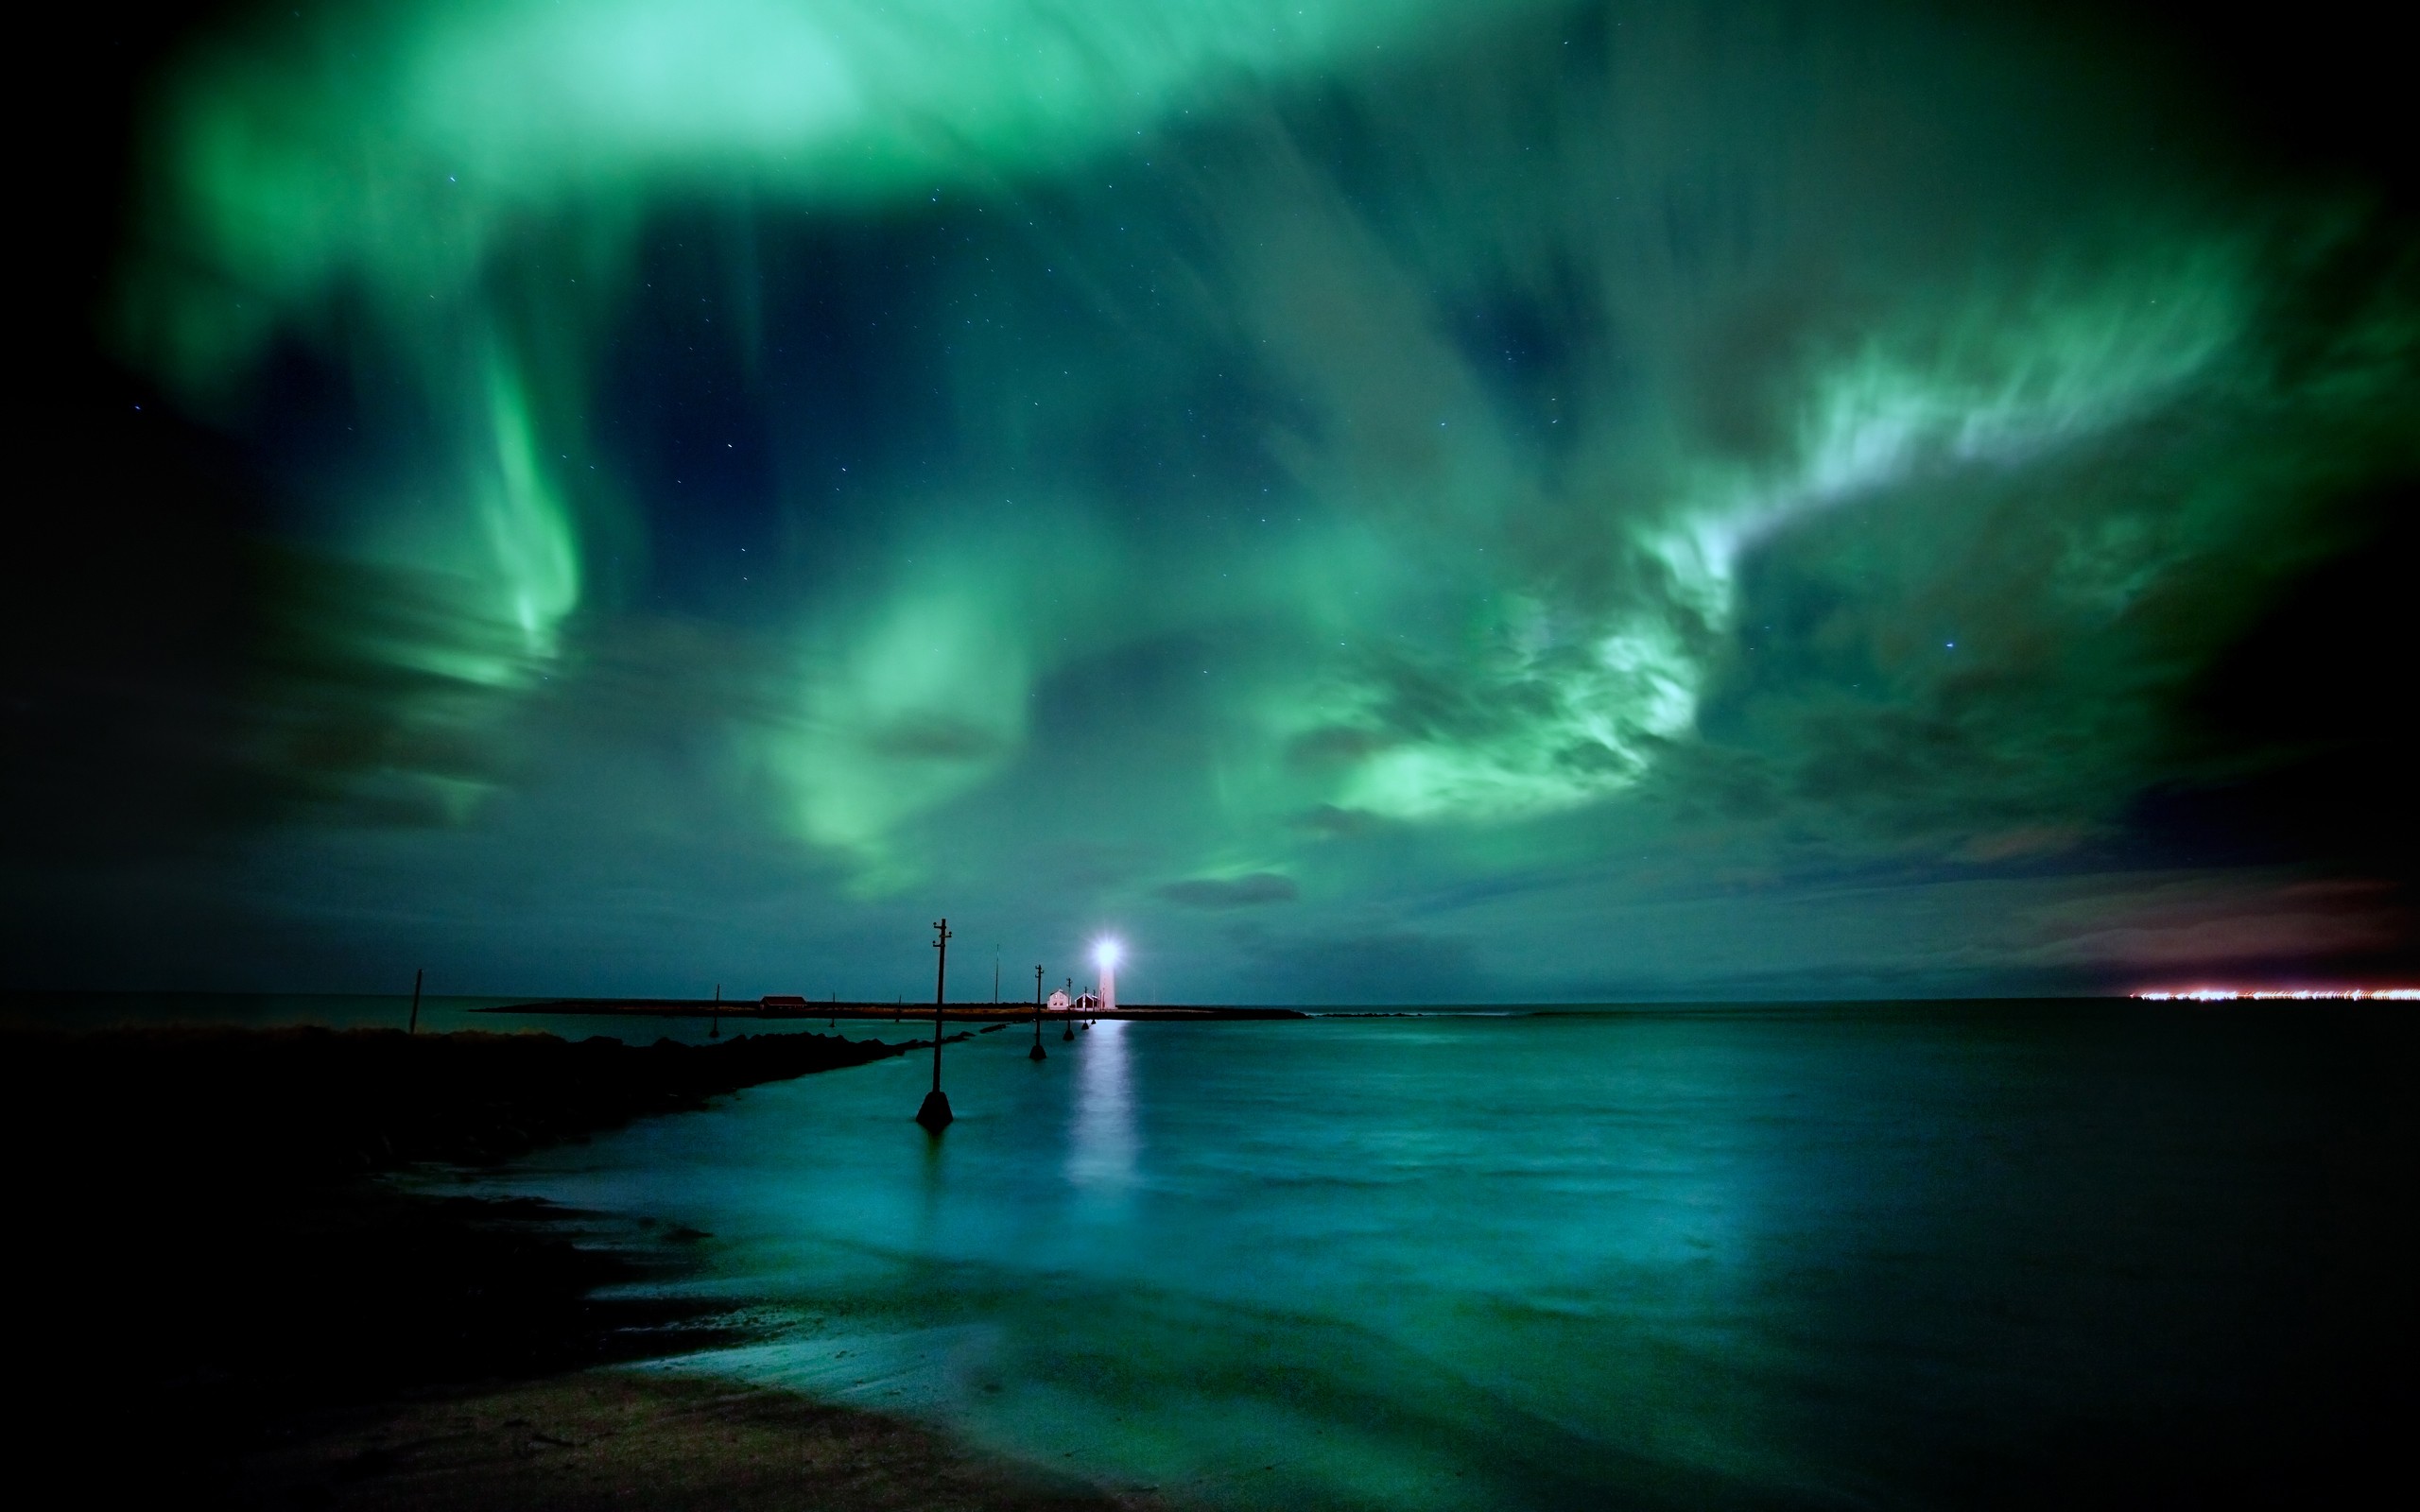 General 2560x1600 aurorae skyscape nordic landscapes nature outdoors low light landscape night sky